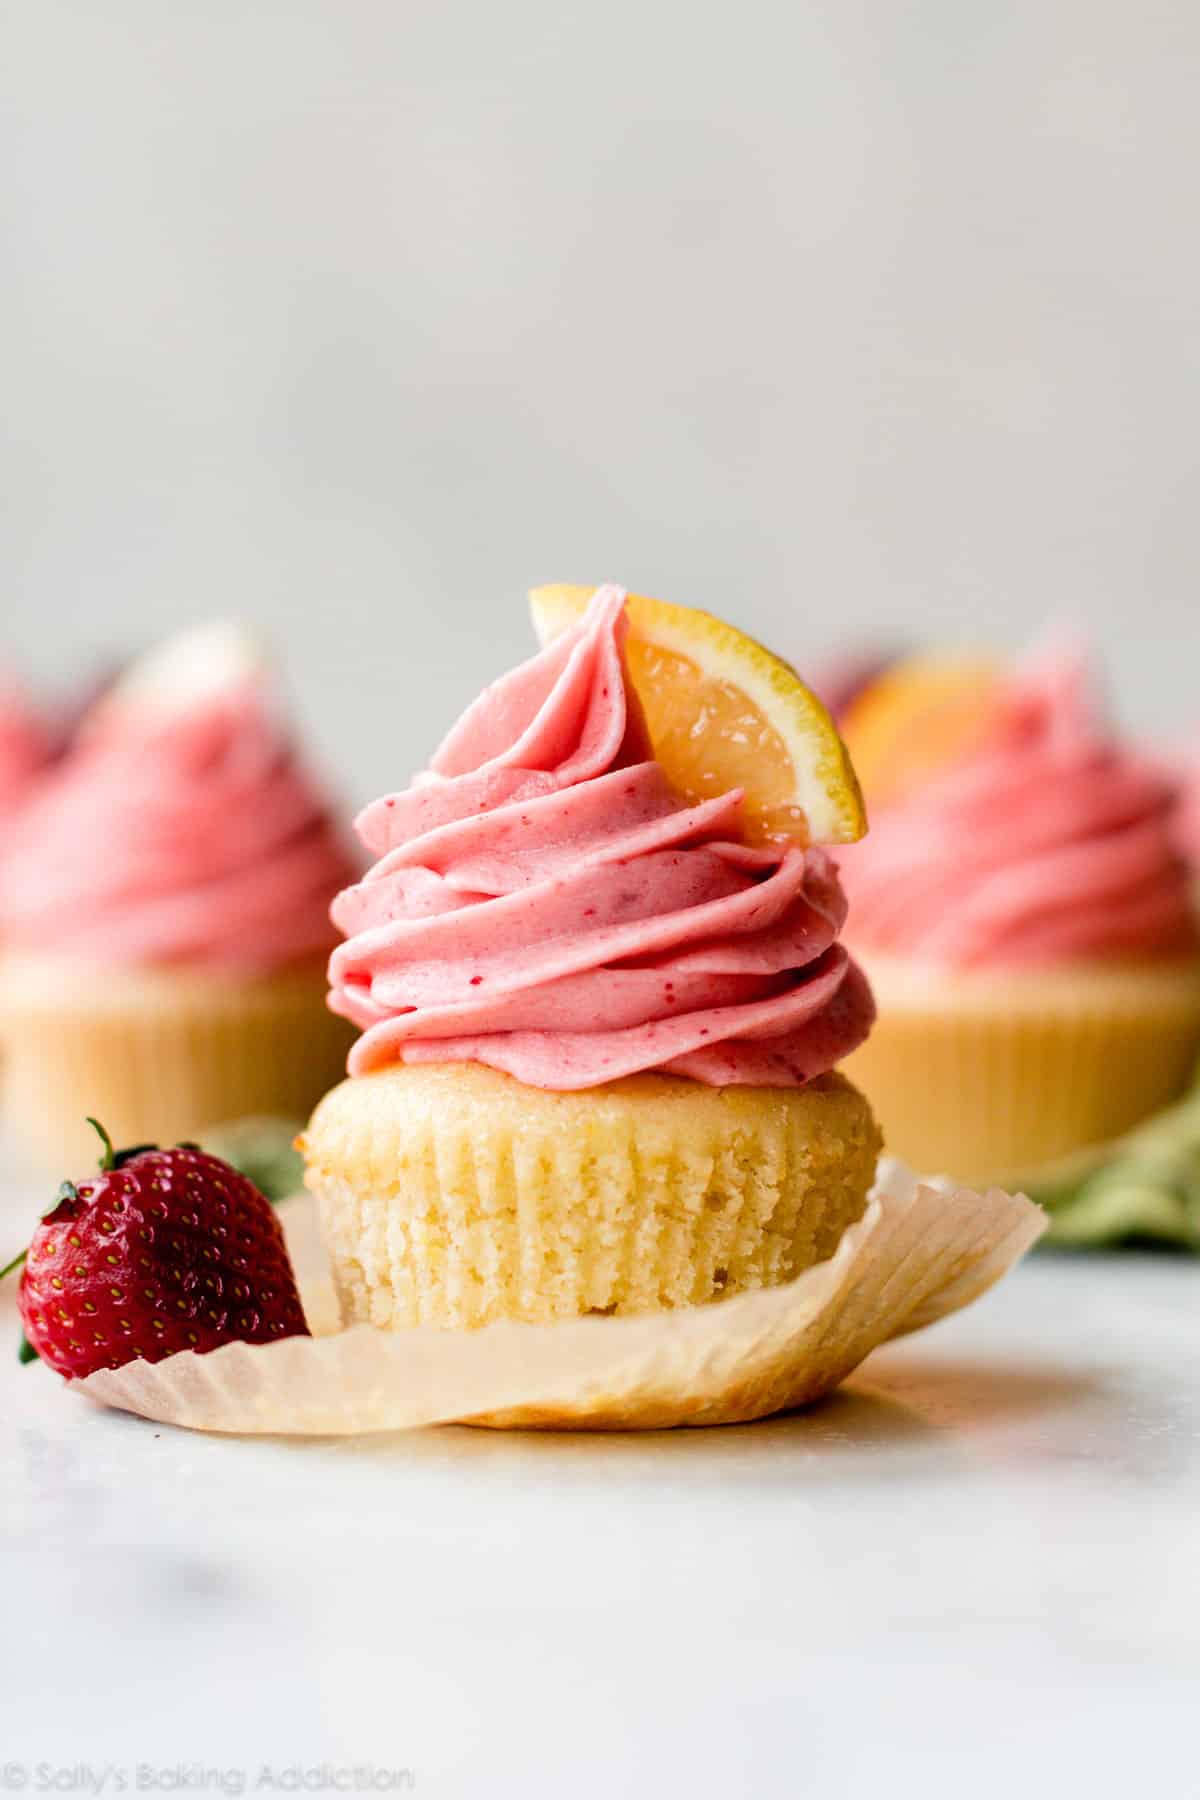 unwrapped lemon cupcake with strawberry frosting and a lemon slice on top